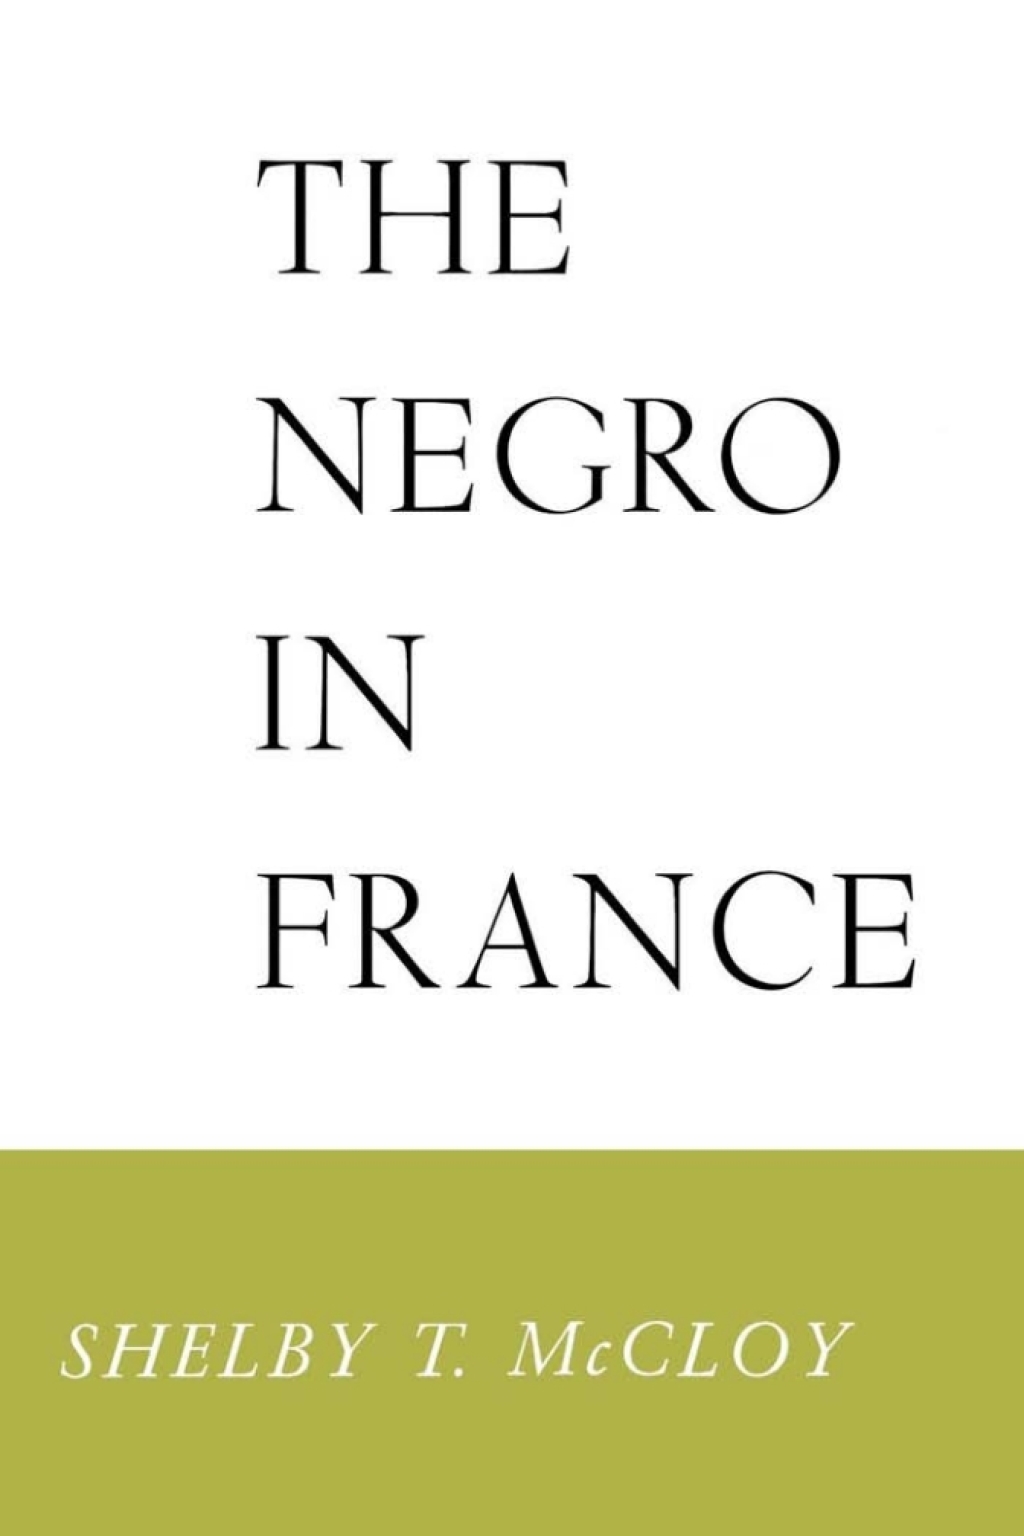 The Negro in France (eBook) - Shelby T. McCloy